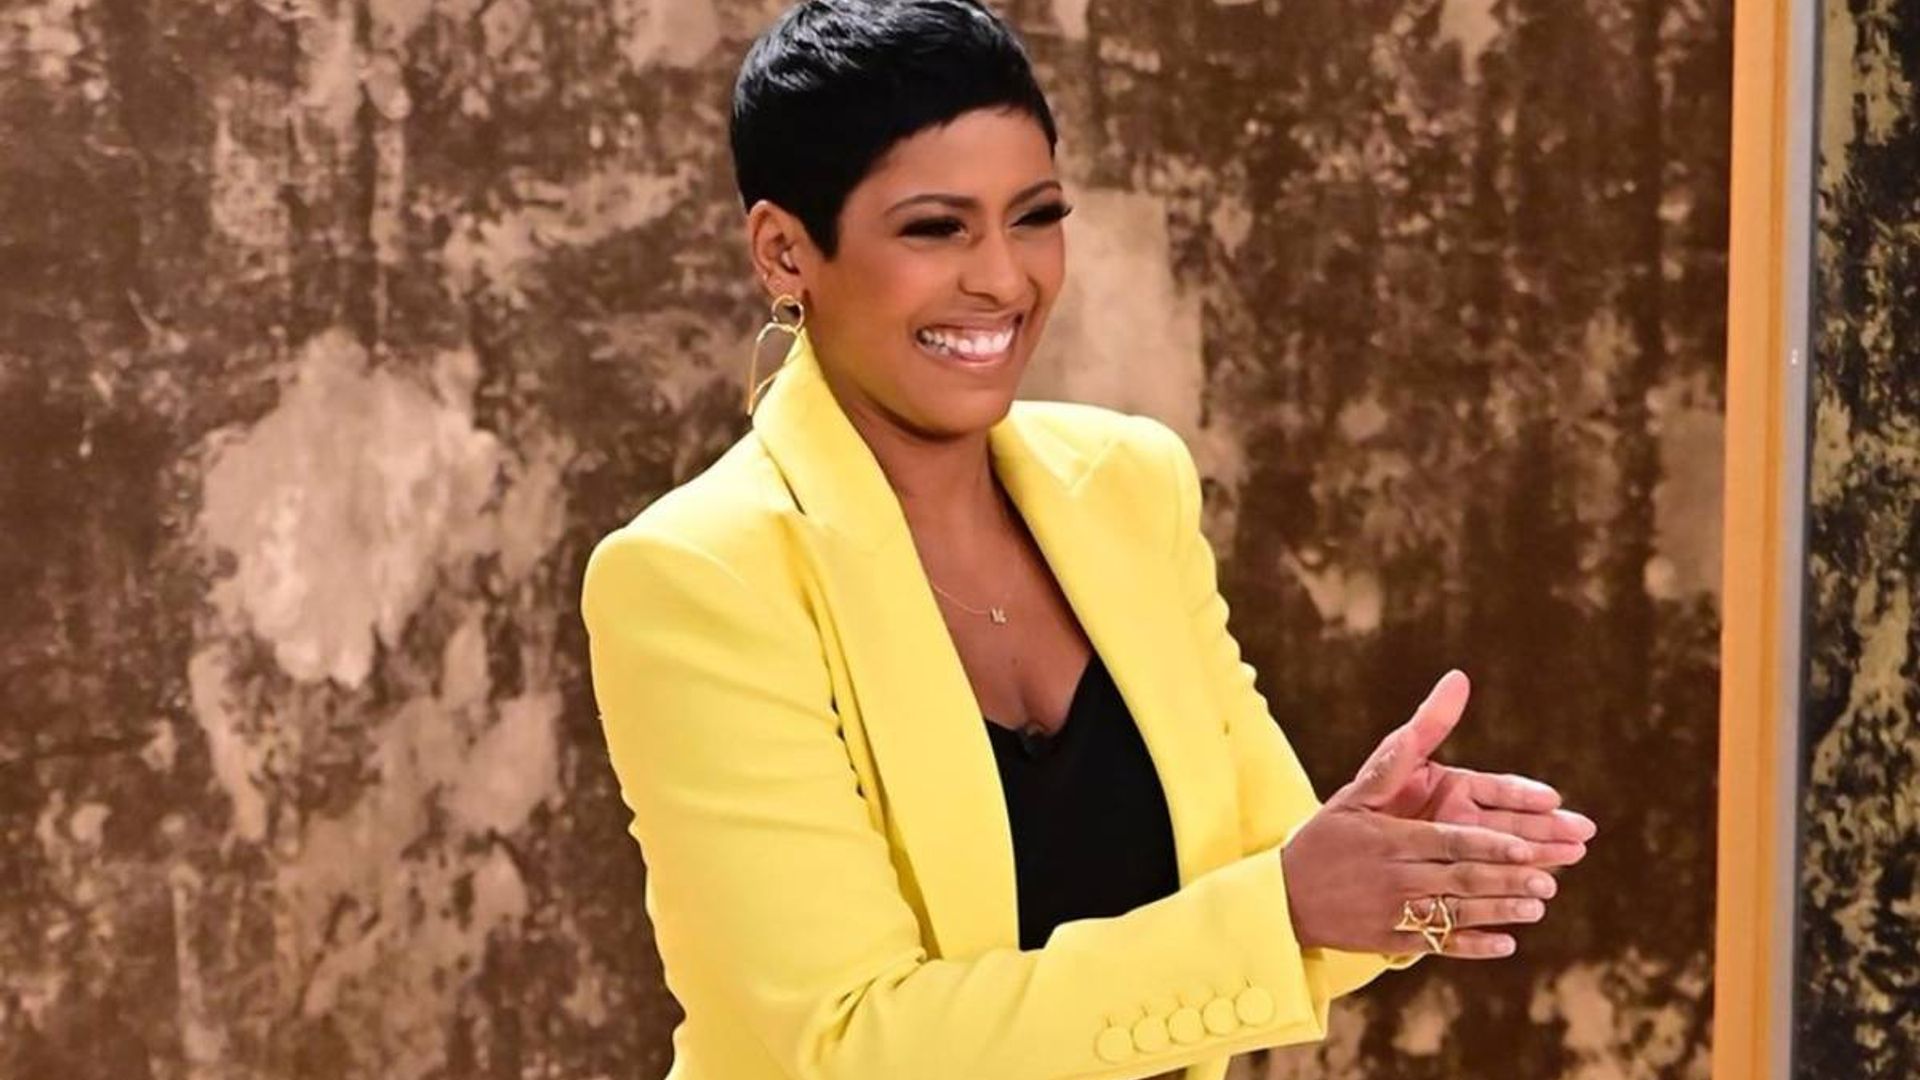 Tamron Hall’s bright yellow suit is the girl boss look everyone needs for spring